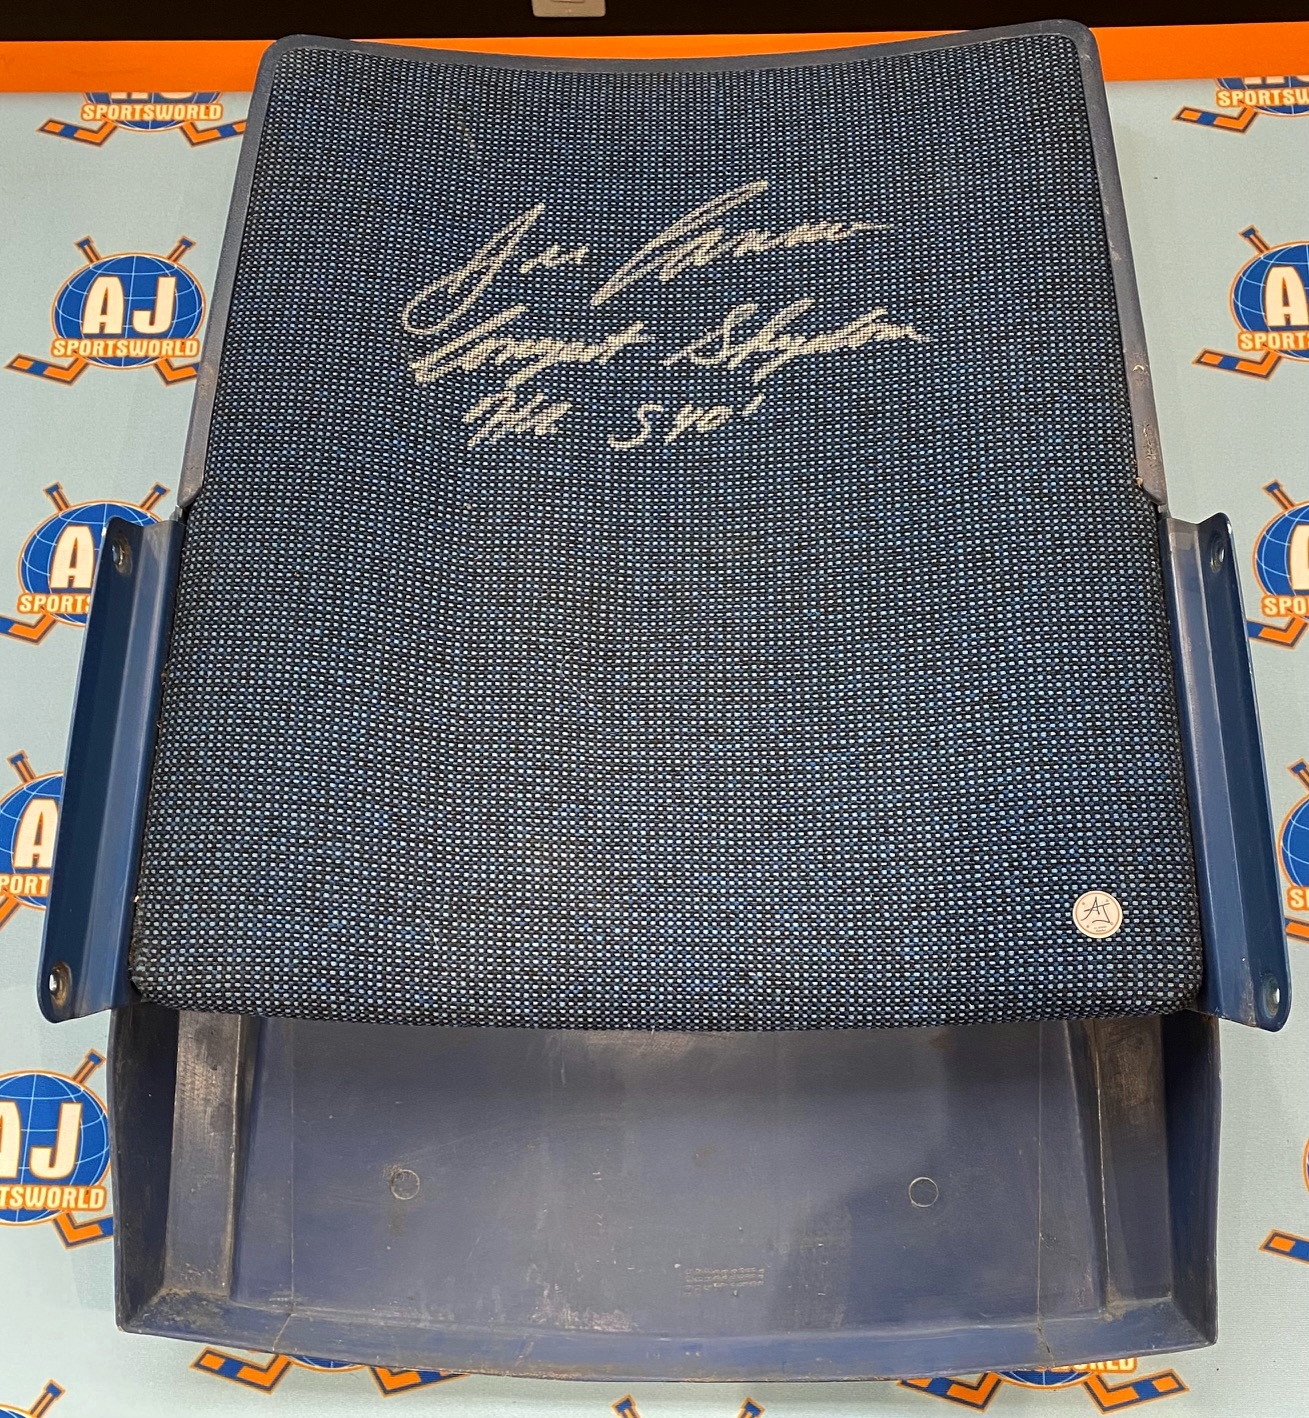 Jose Canseco Oakland As Signed SkyDome Stadium Seat Back with Longest HR Note